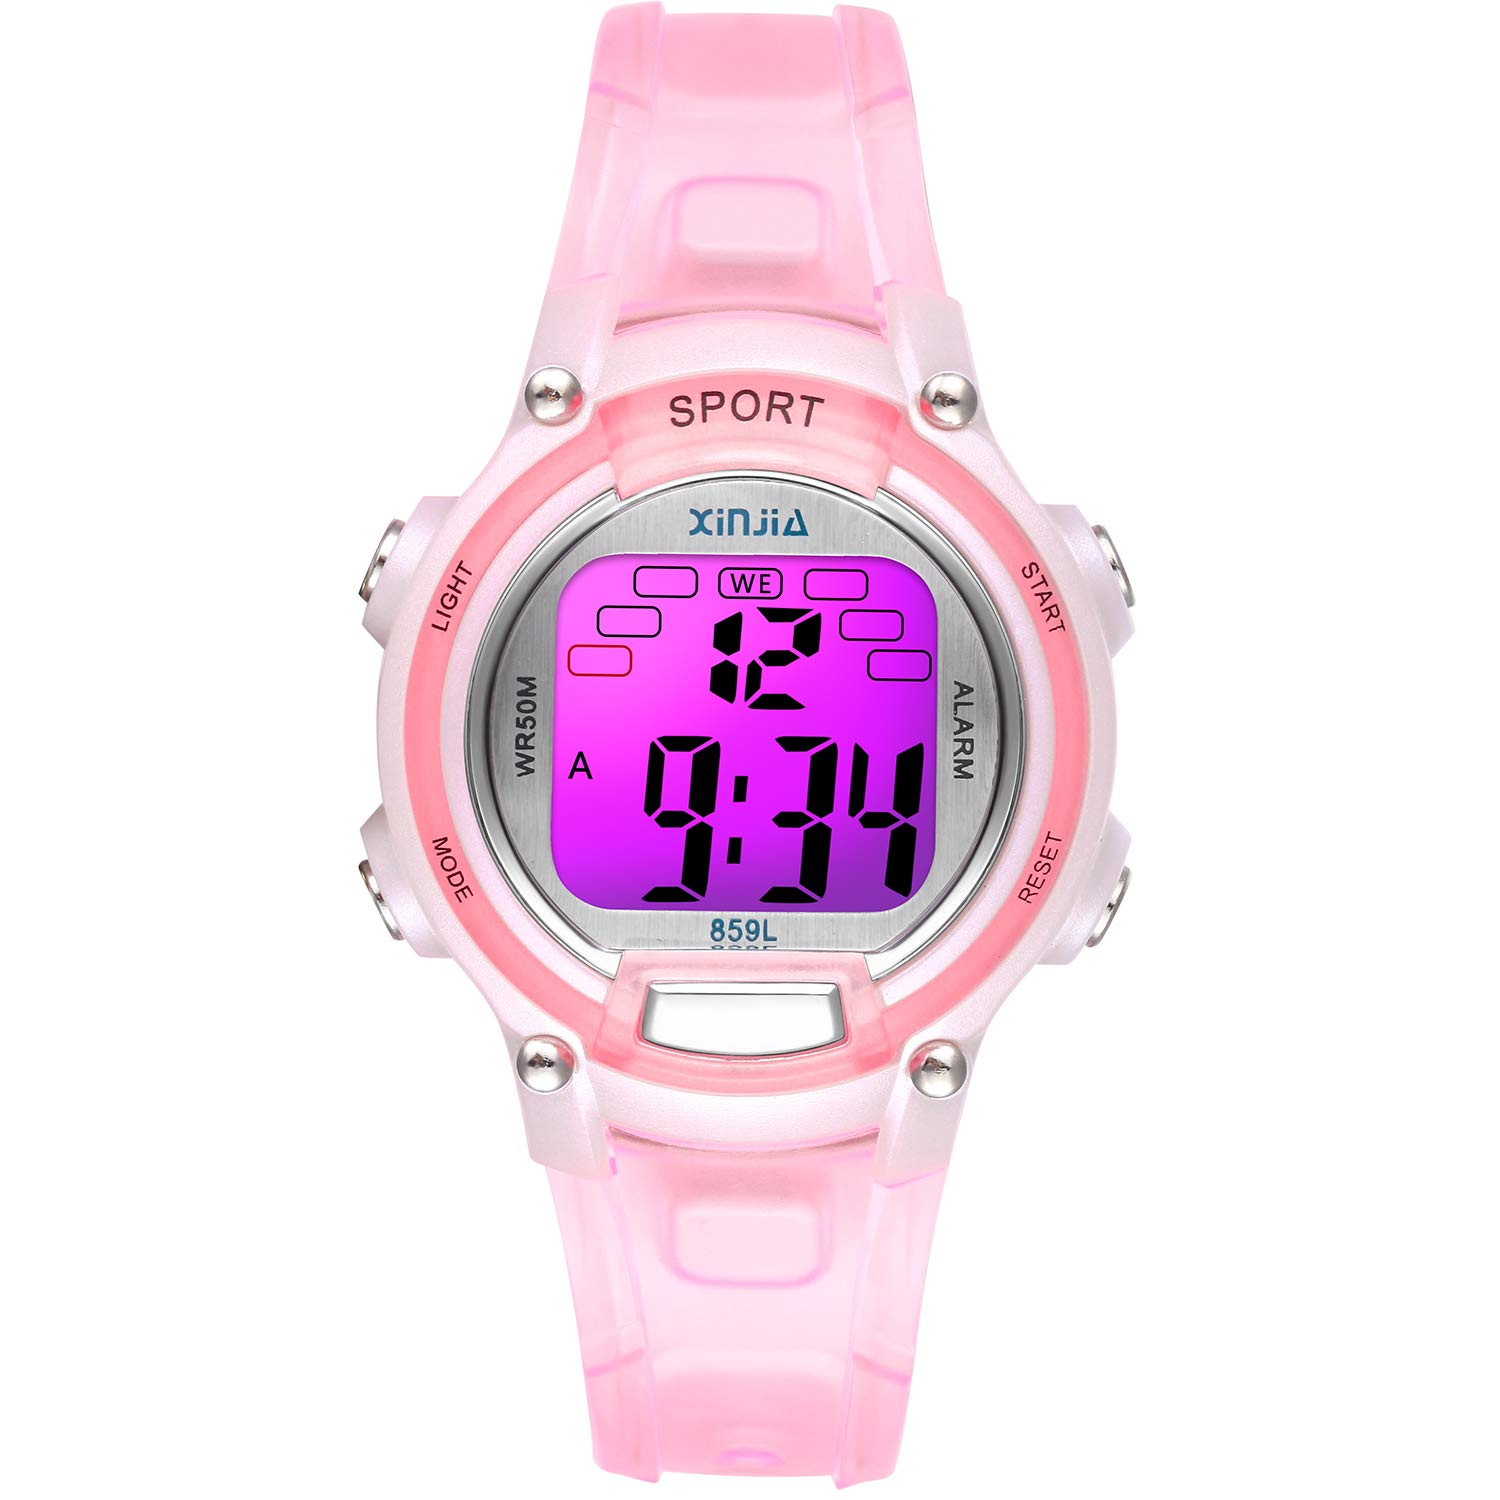 Edillas Kids Digital Watches for Girls Boys,7 Colors LED Flashing Waterproof Wrist Watches for Boys Girls Child Sport Outdoor Multifunctional Wrist Watches with Stopwatch/Alarm for Ages 5-14